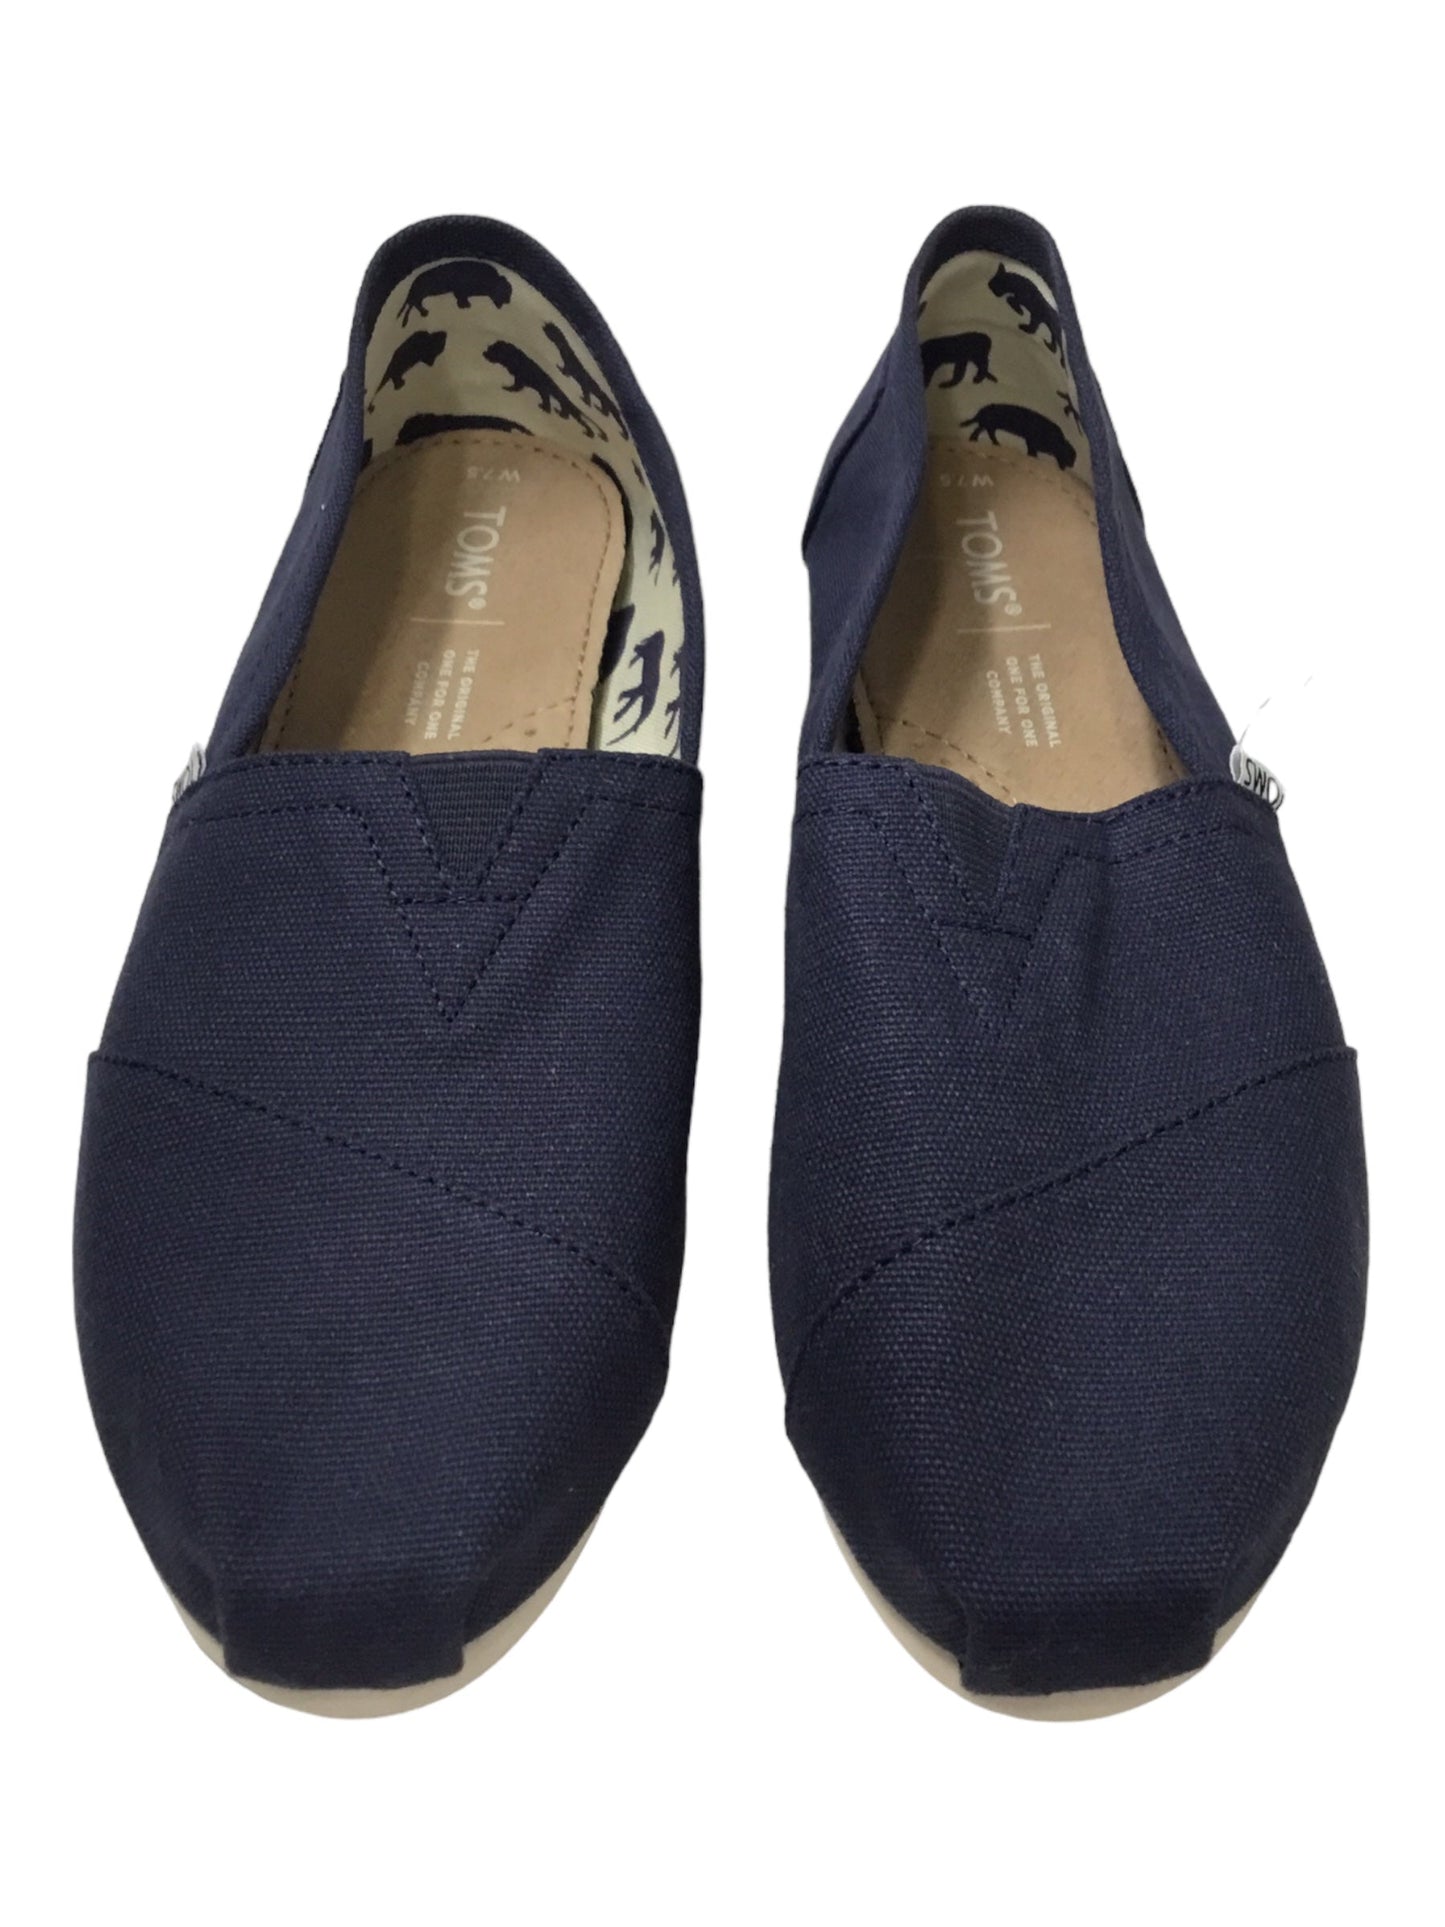 Navy Shoes Flats Toms, Size 7.5